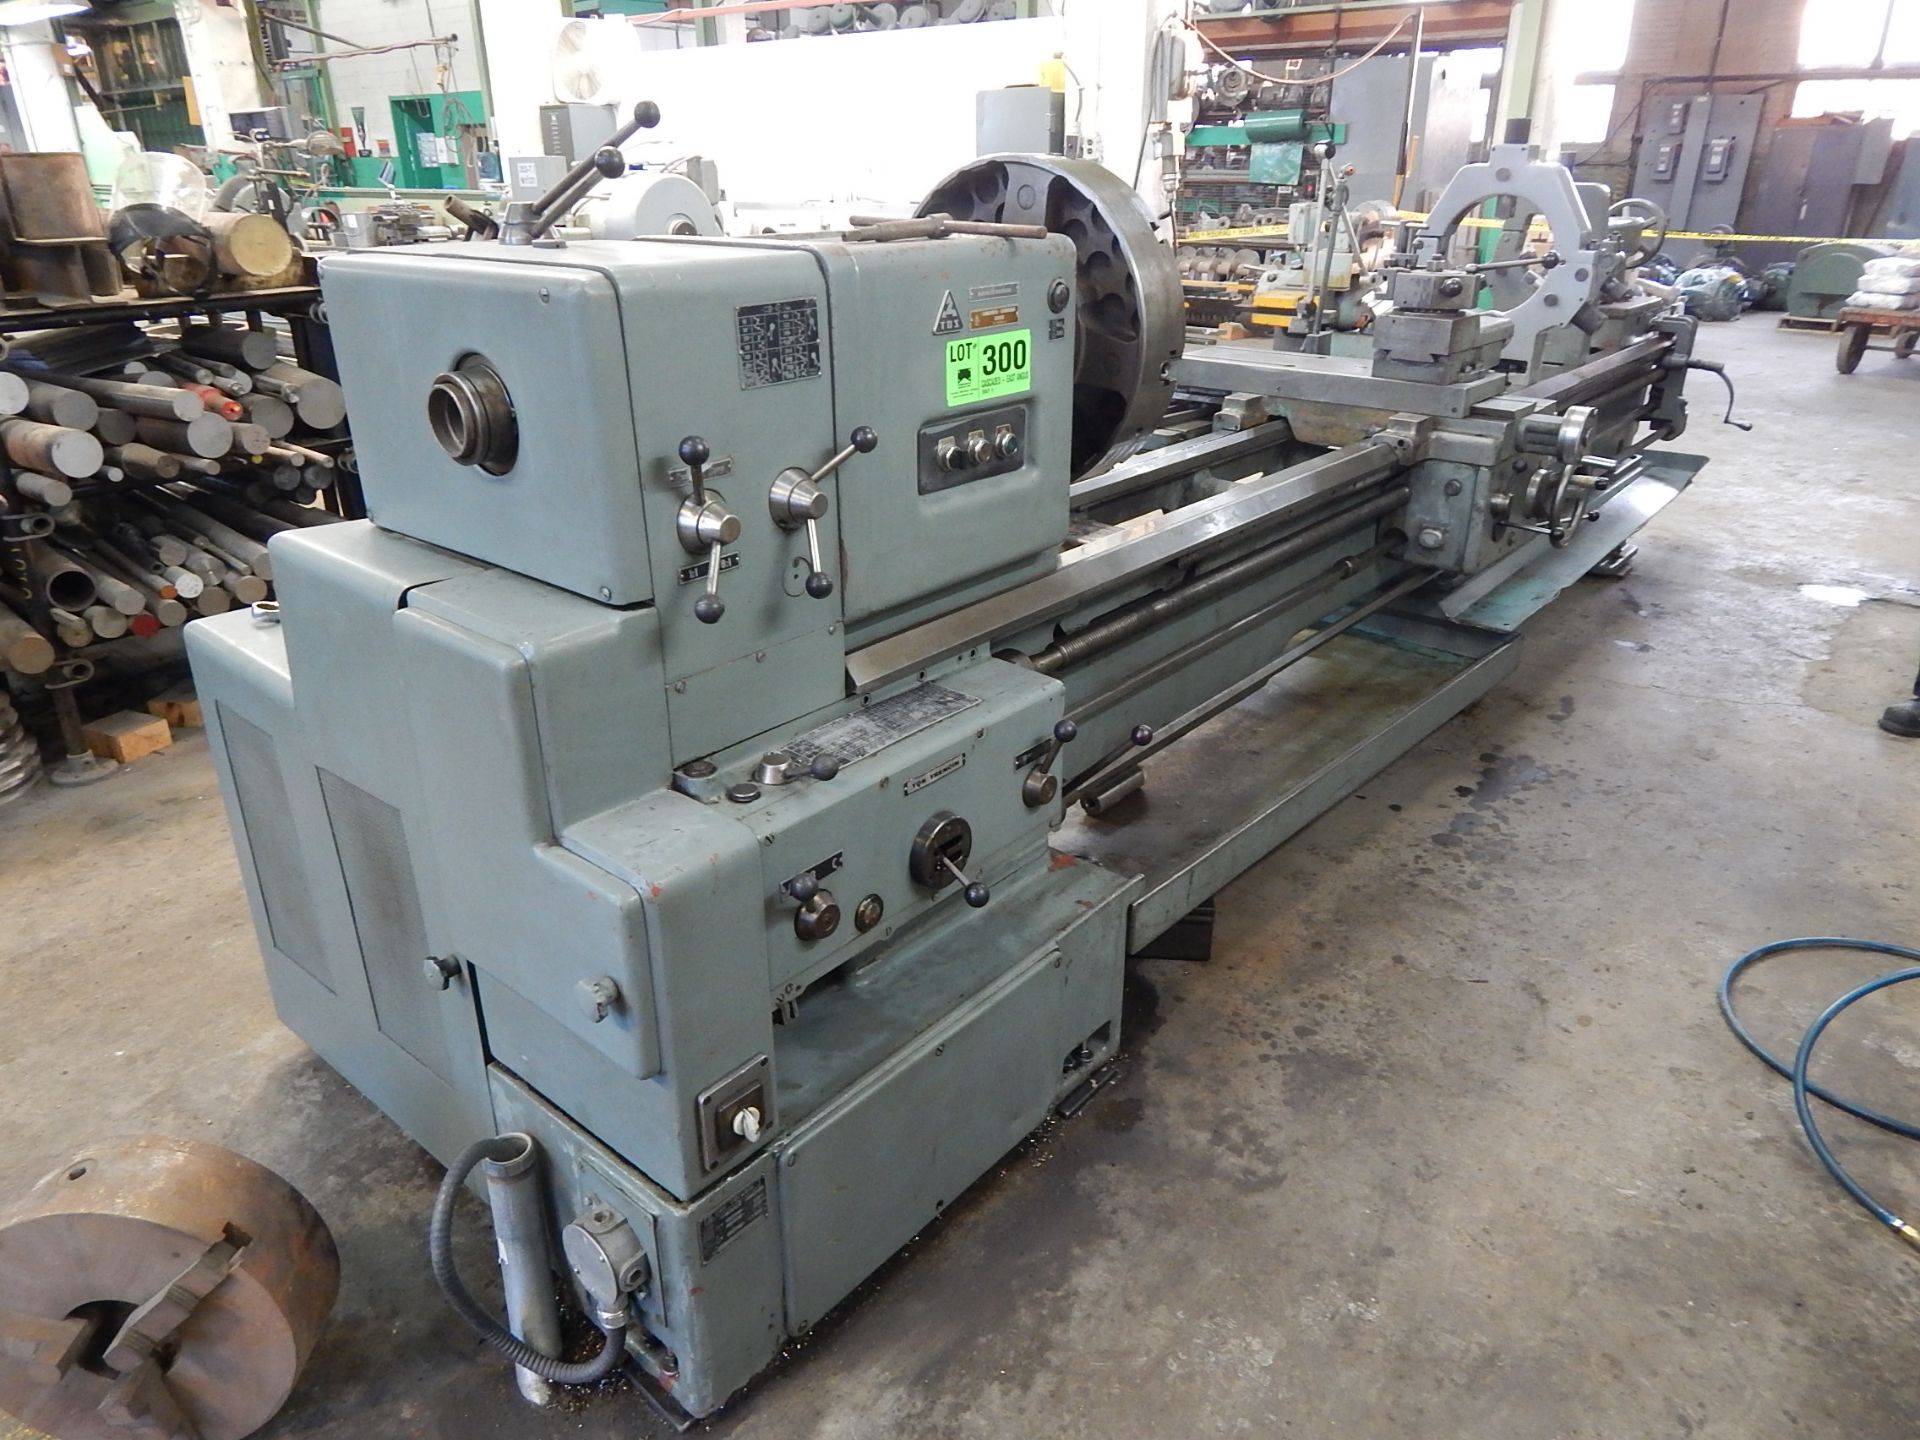 TOS SN55-71 GAP BED ENGINE LATHE WITH 22" SWING OVER BED, 31.5" SWING OVER GAP, 80" CENTERS, 18"